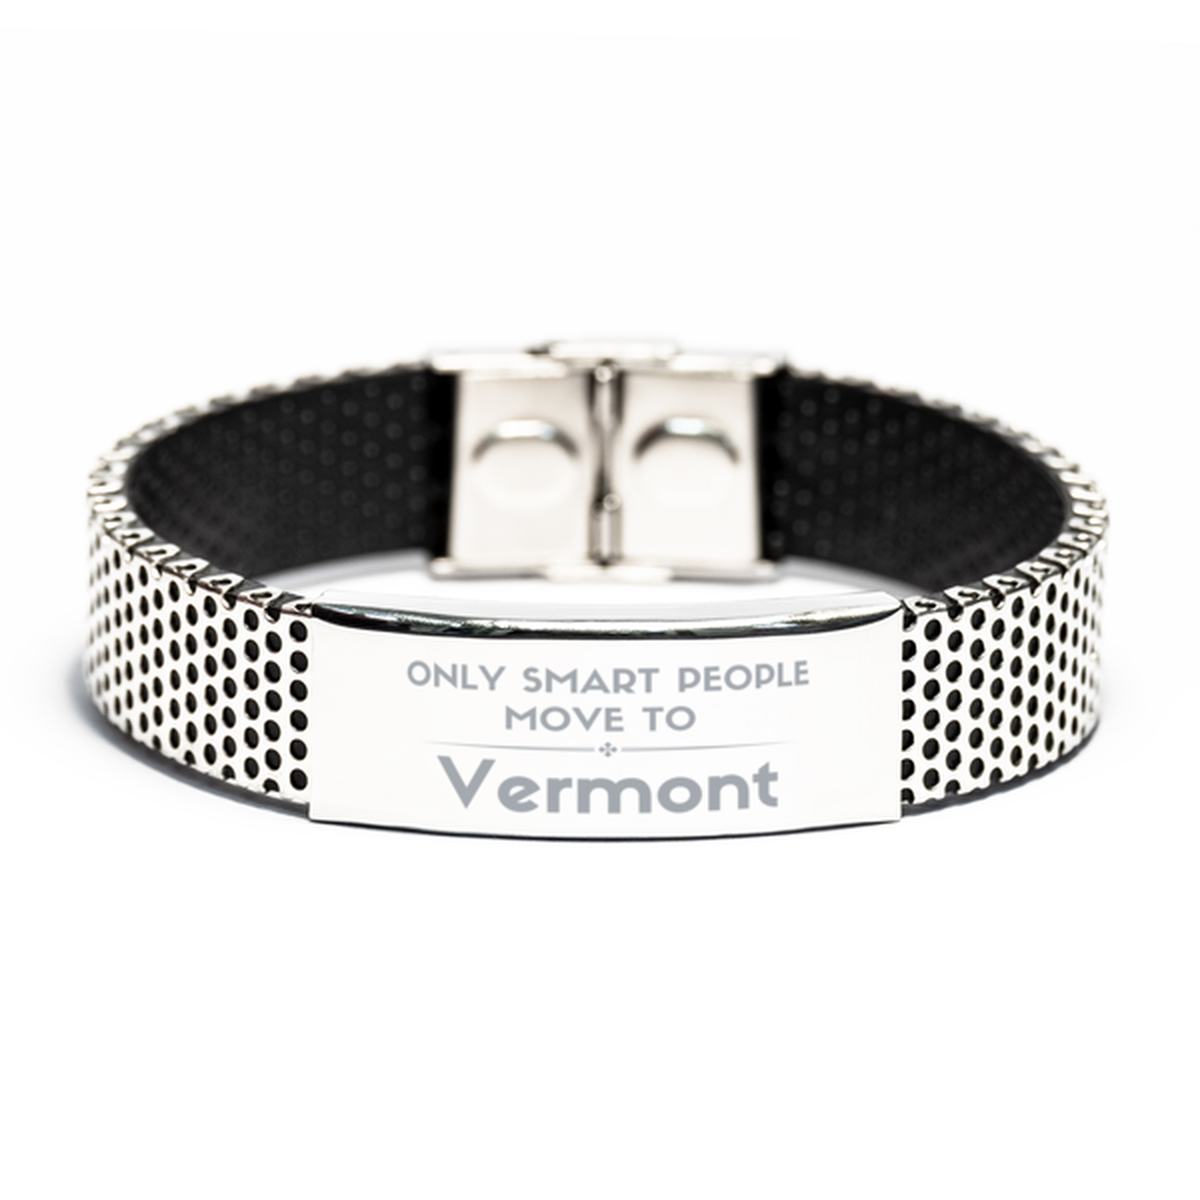 Only smart people move to Vermont Stainless Steel Bracelet, Gag Gifts For Vermont, Move to Vermont Gifts for Friends Coworker Funny Saying Quote